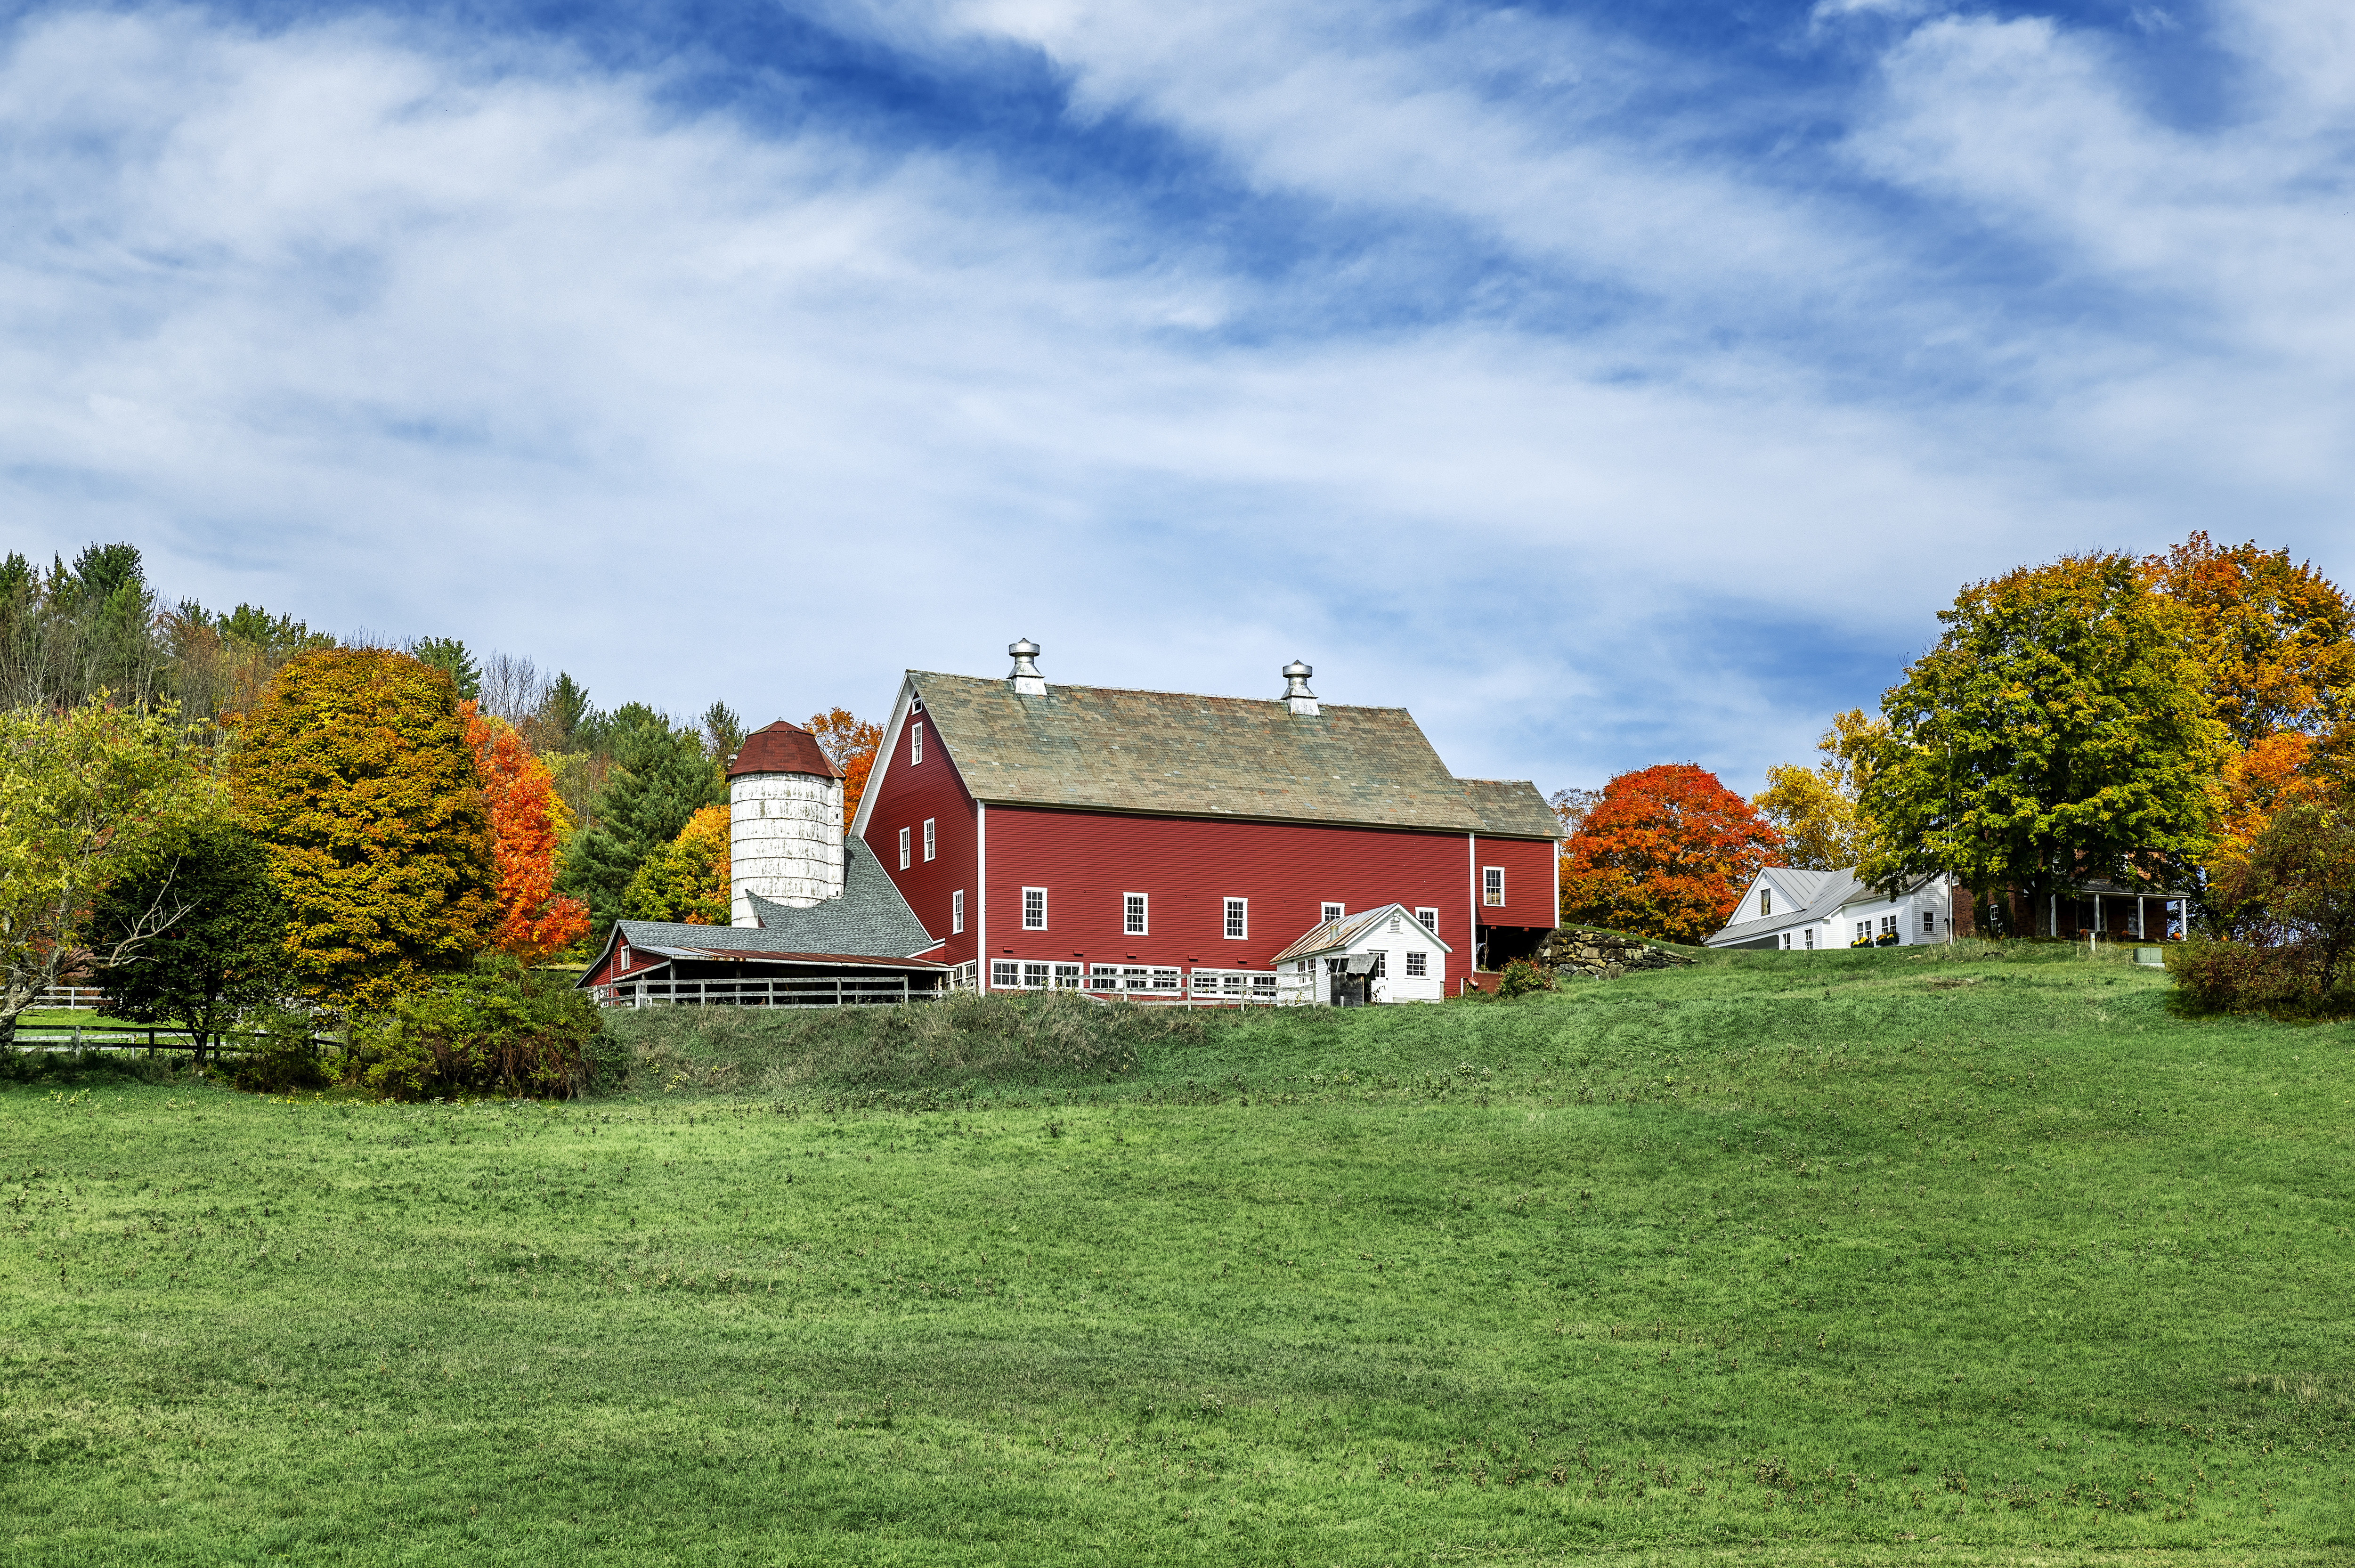 A barn in Woodstock, Vermont.